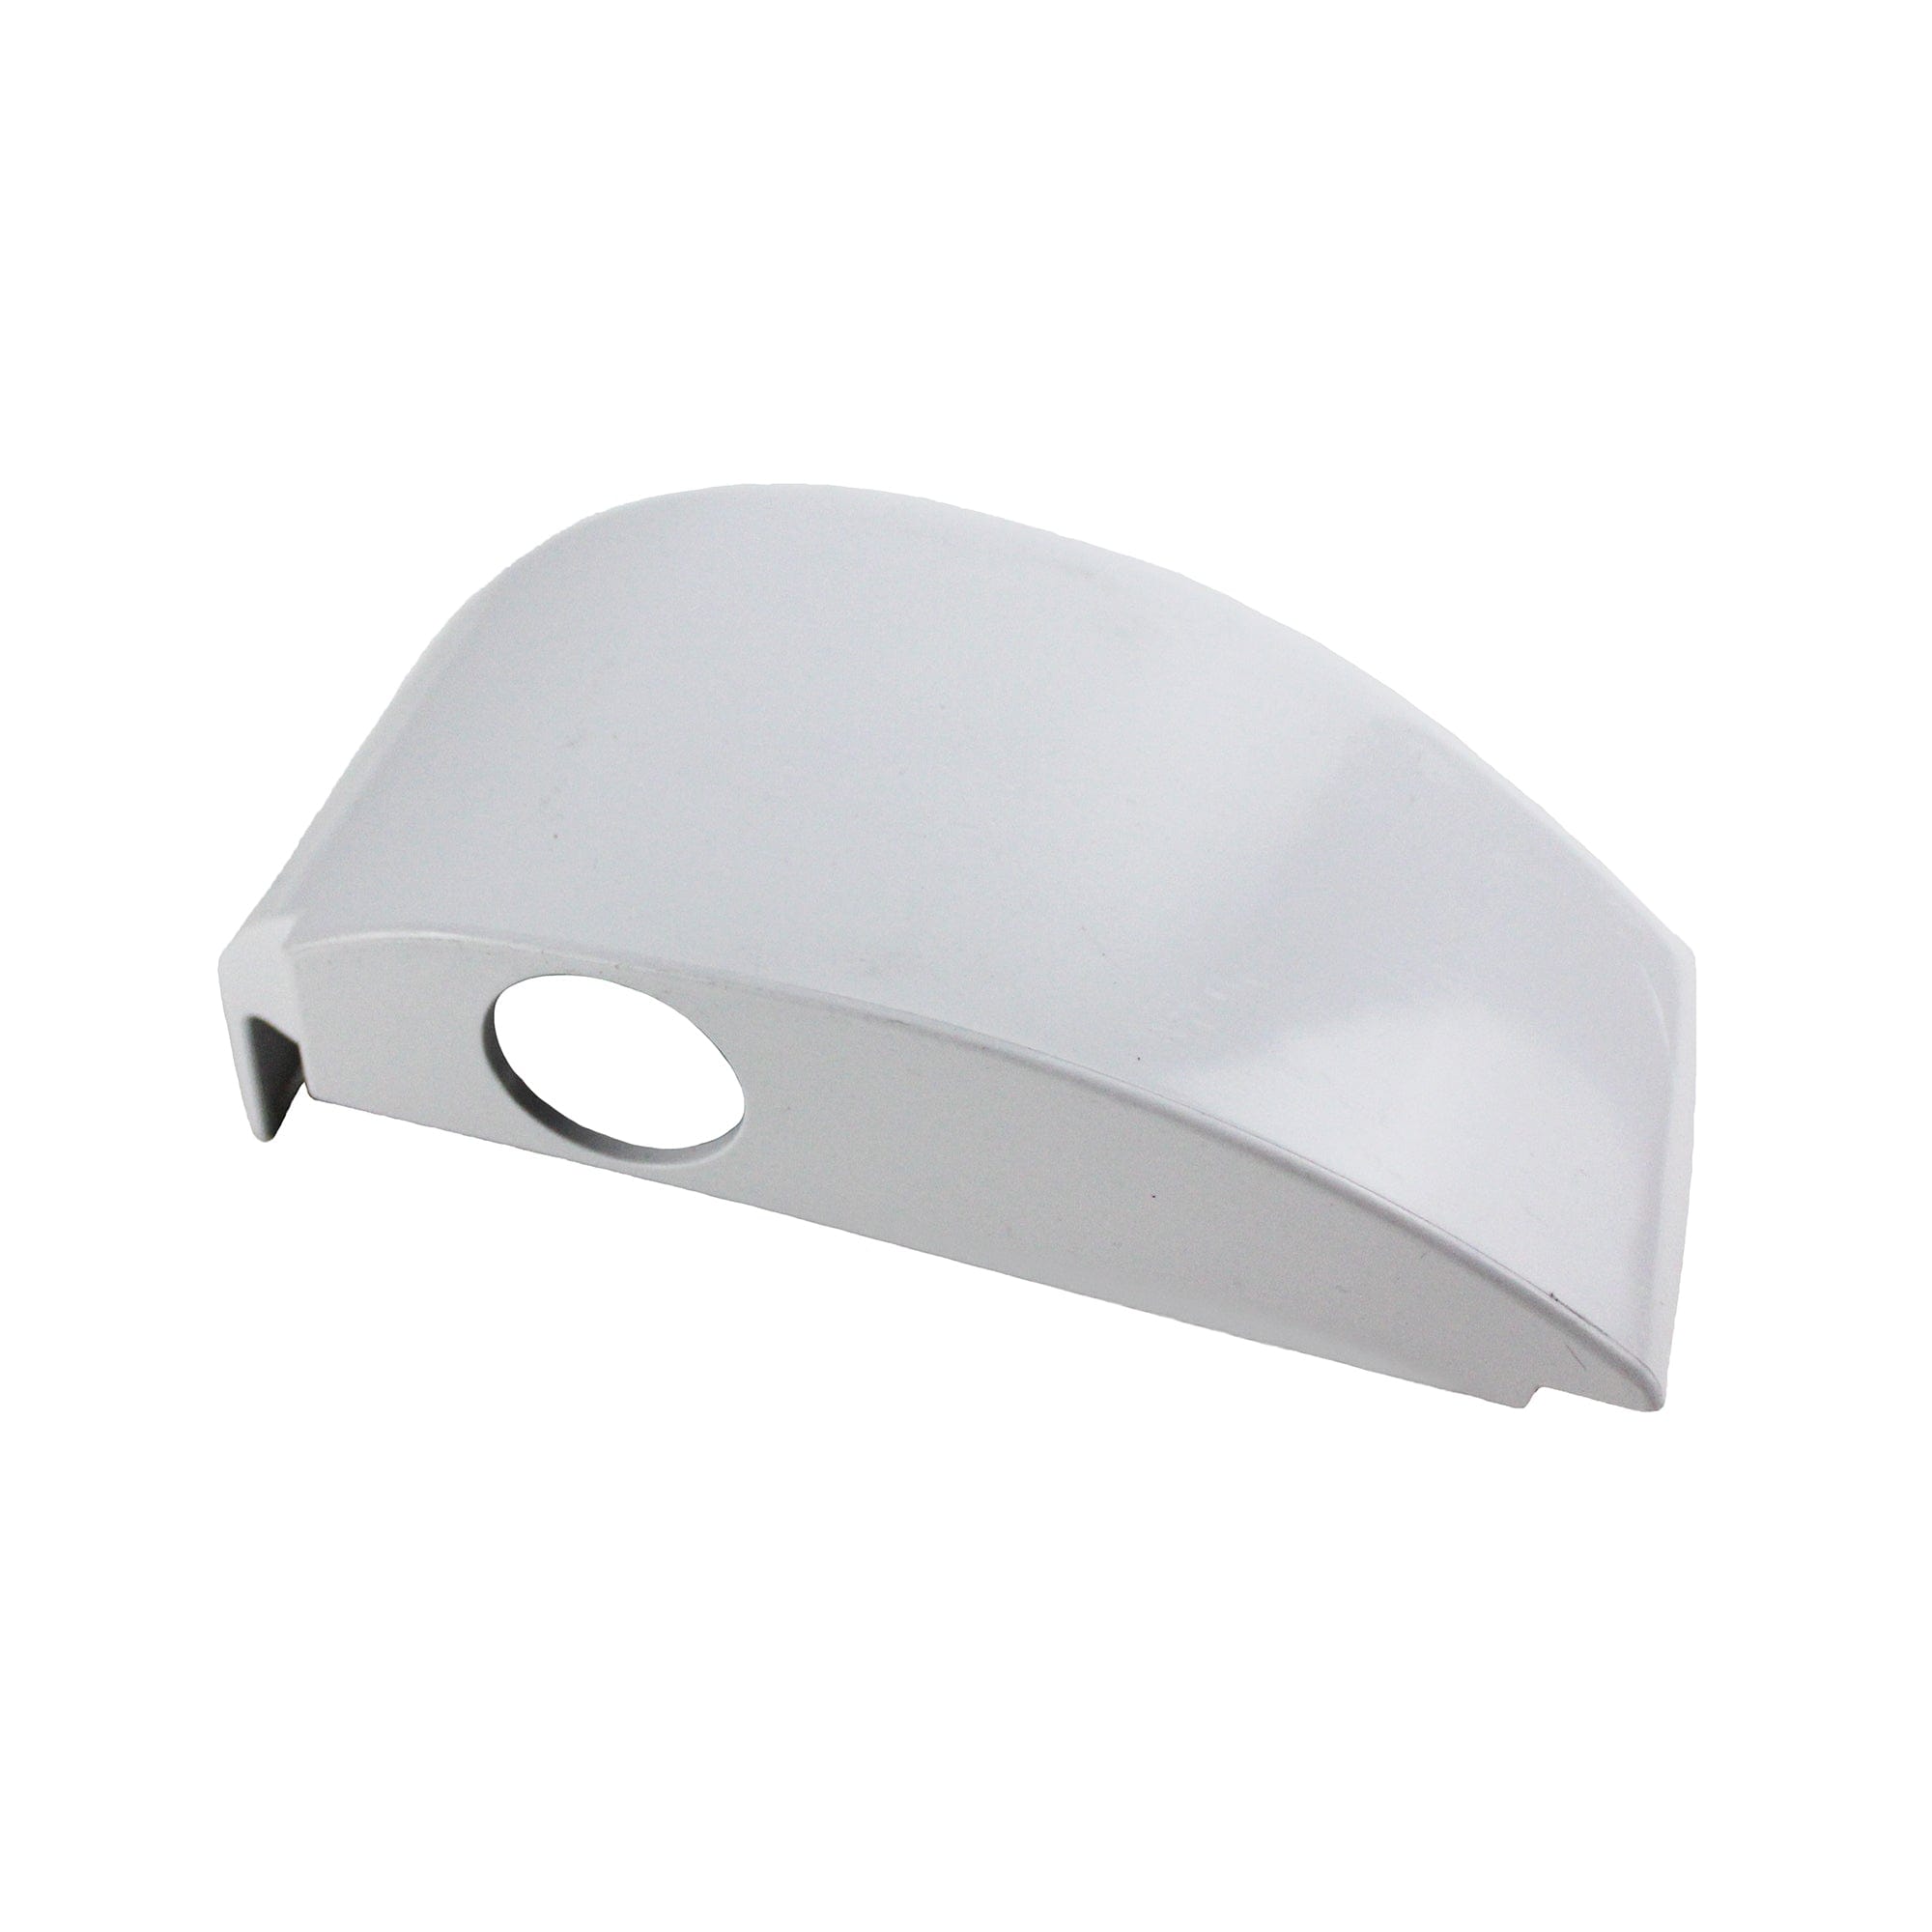 Dometic 3312800.000B Left Hand LH Outer Awning Cover, White 200 & 231 Series, 9108557292